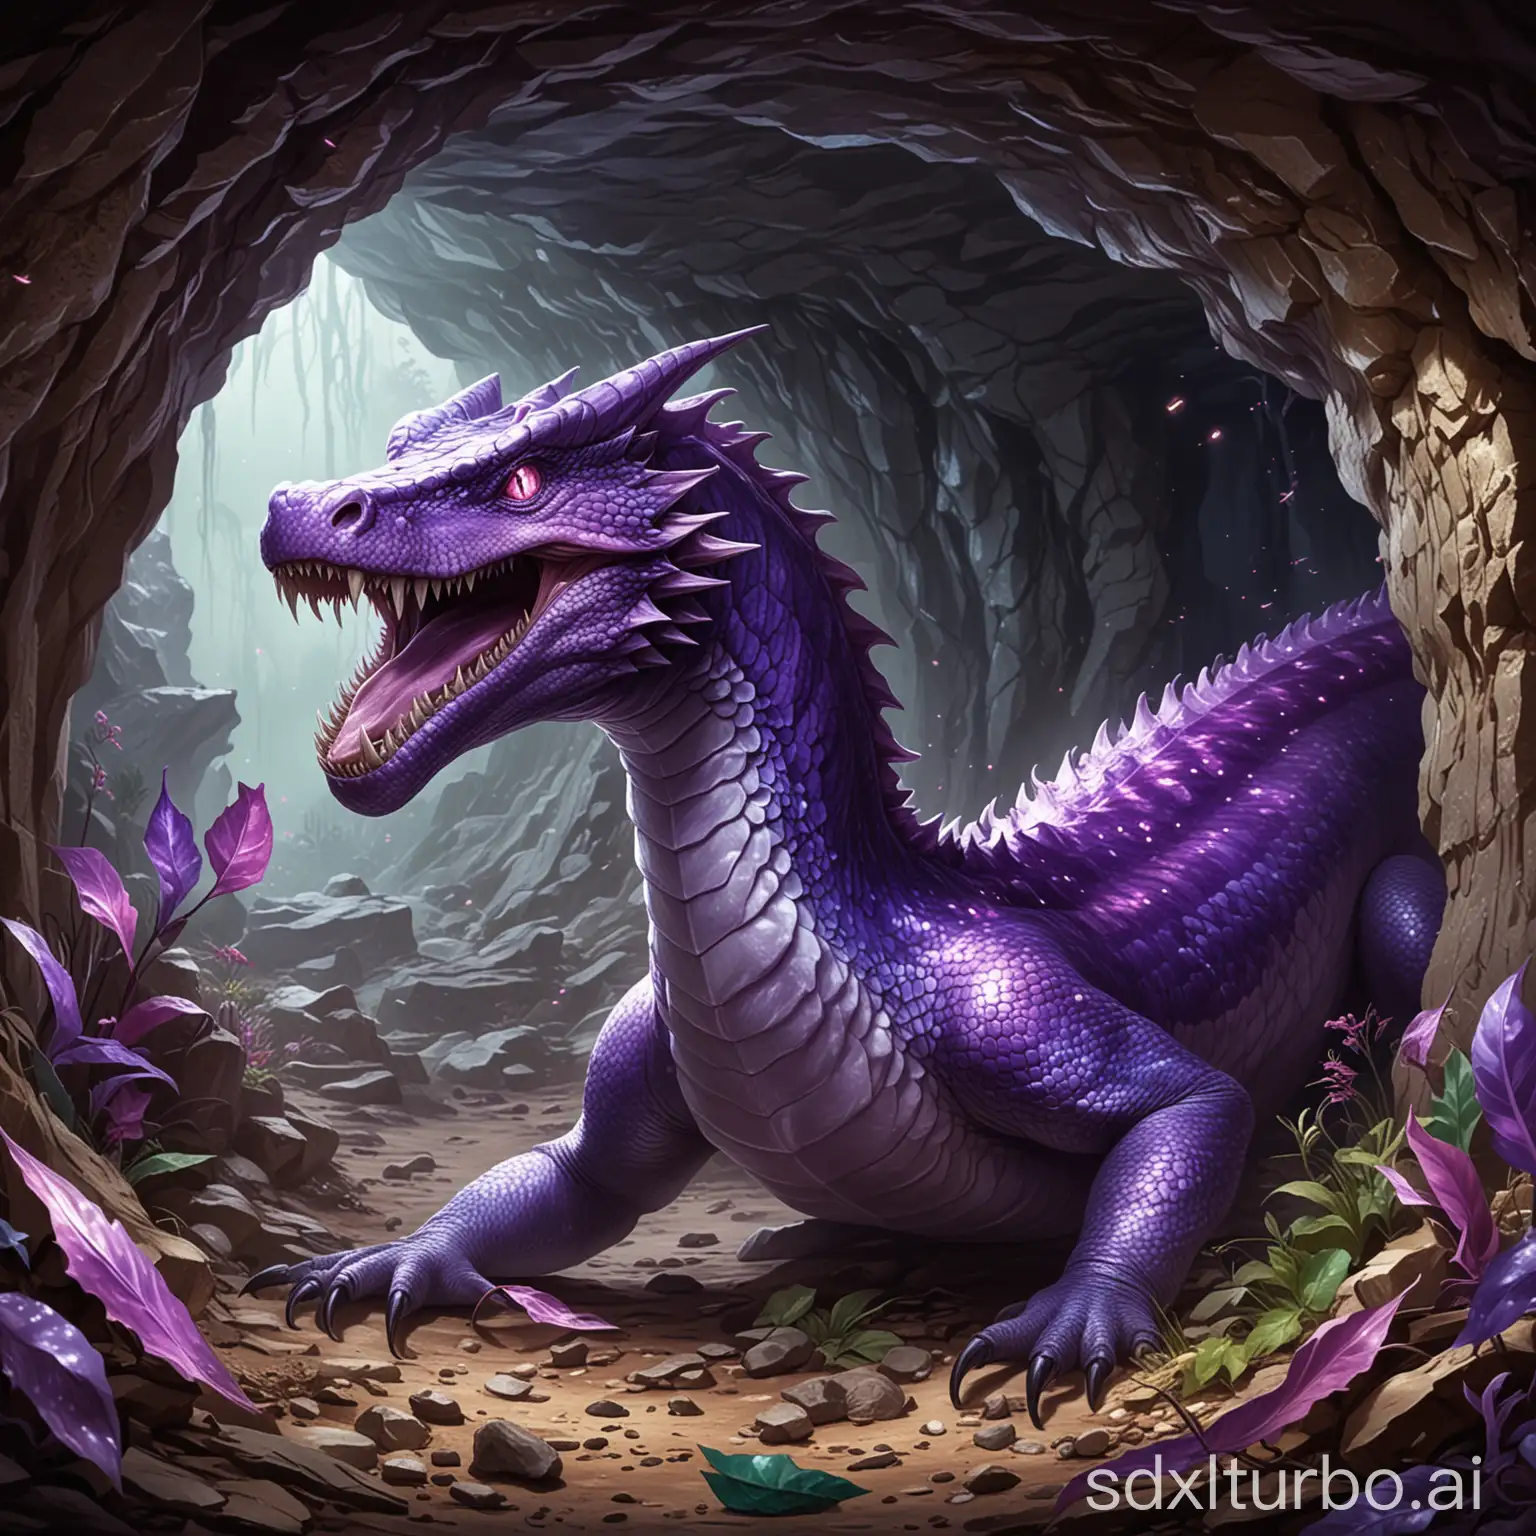 A mighty Lindwurm with purple scales and heads in its cave on its glittering hoard. Appears startled, as if sniffing for adventurers.